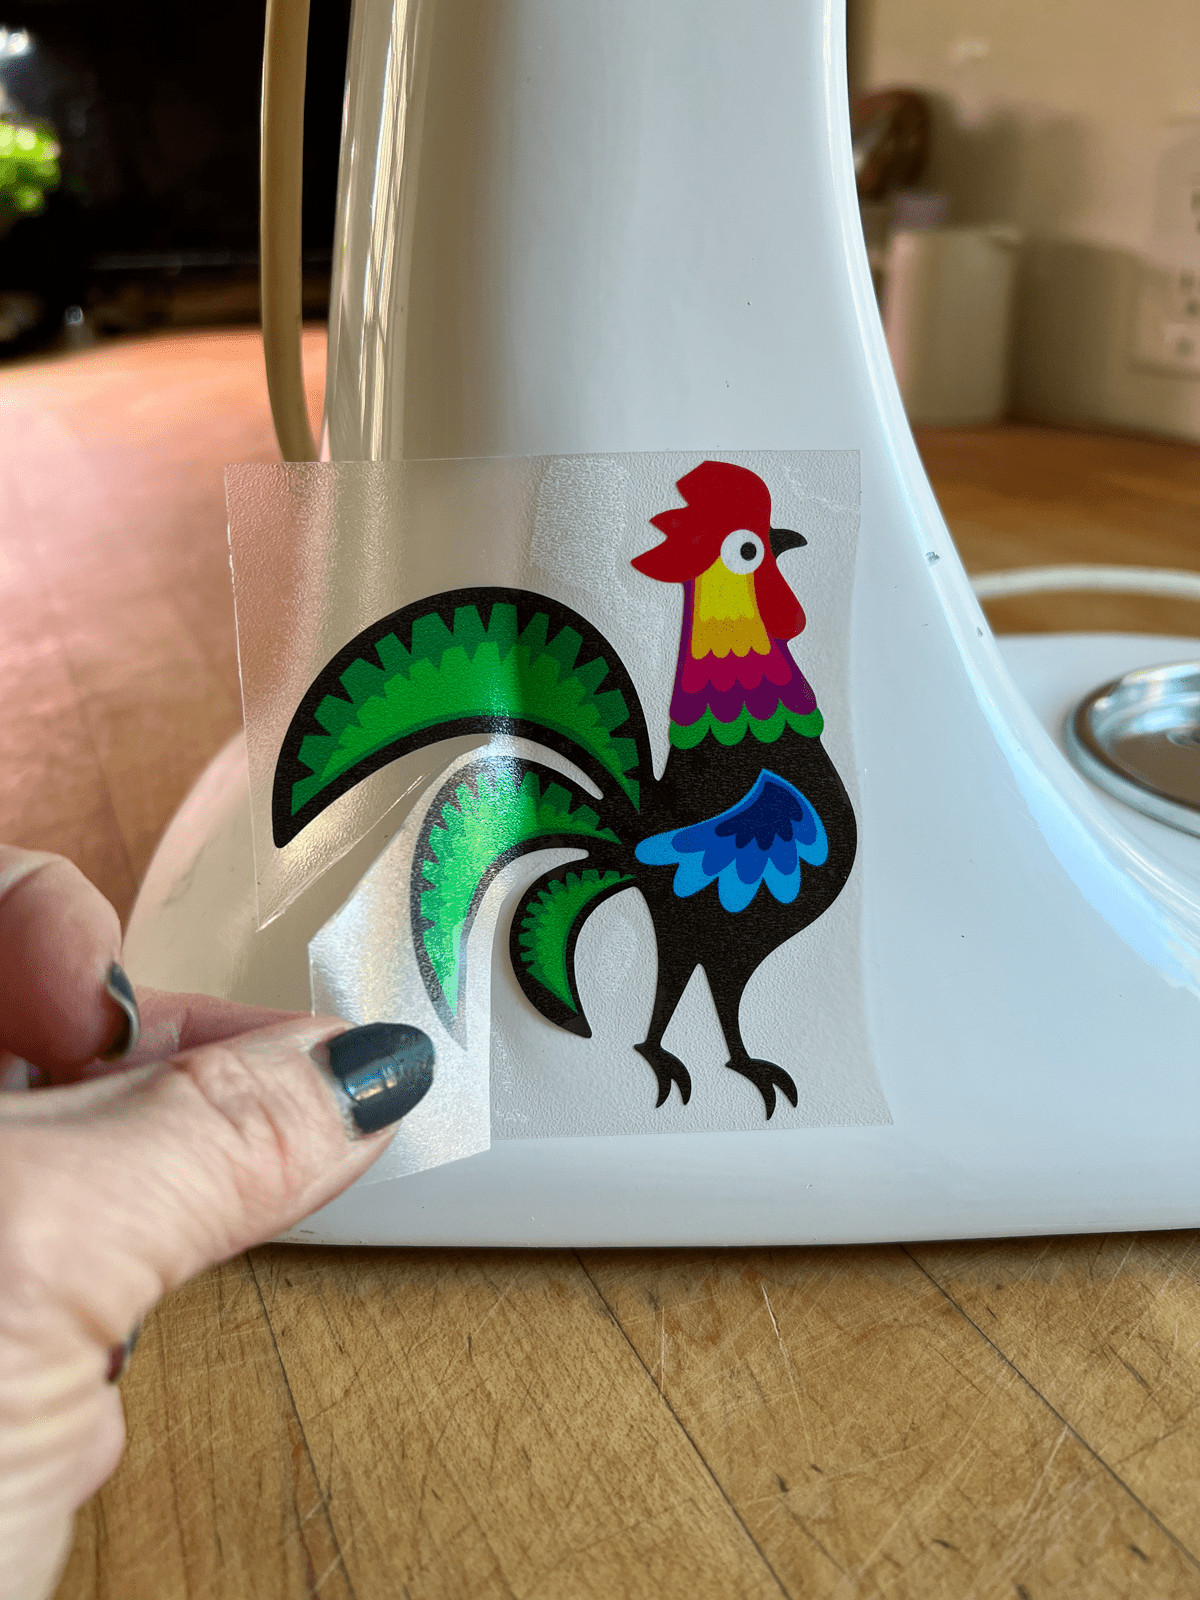 Vinyl rooster decal on stand mixer.